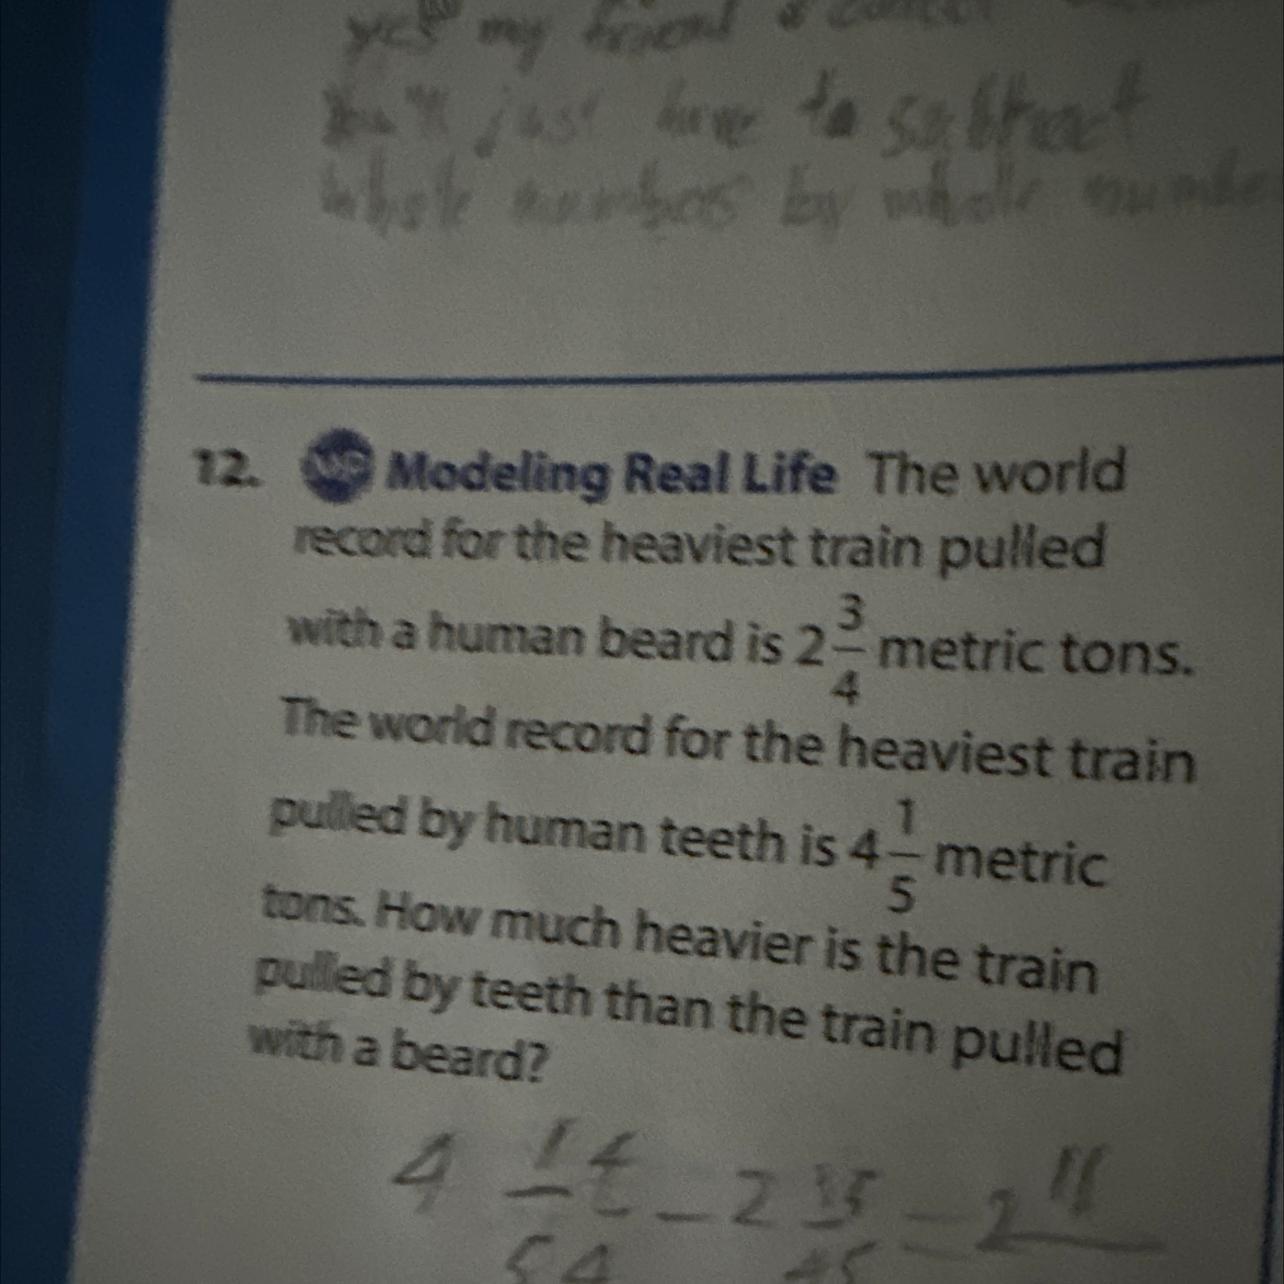 The World Record For The Heaviest Train Pulled With A Human Beard Is A 2 3/4 Metric Tons. How Much Heavier